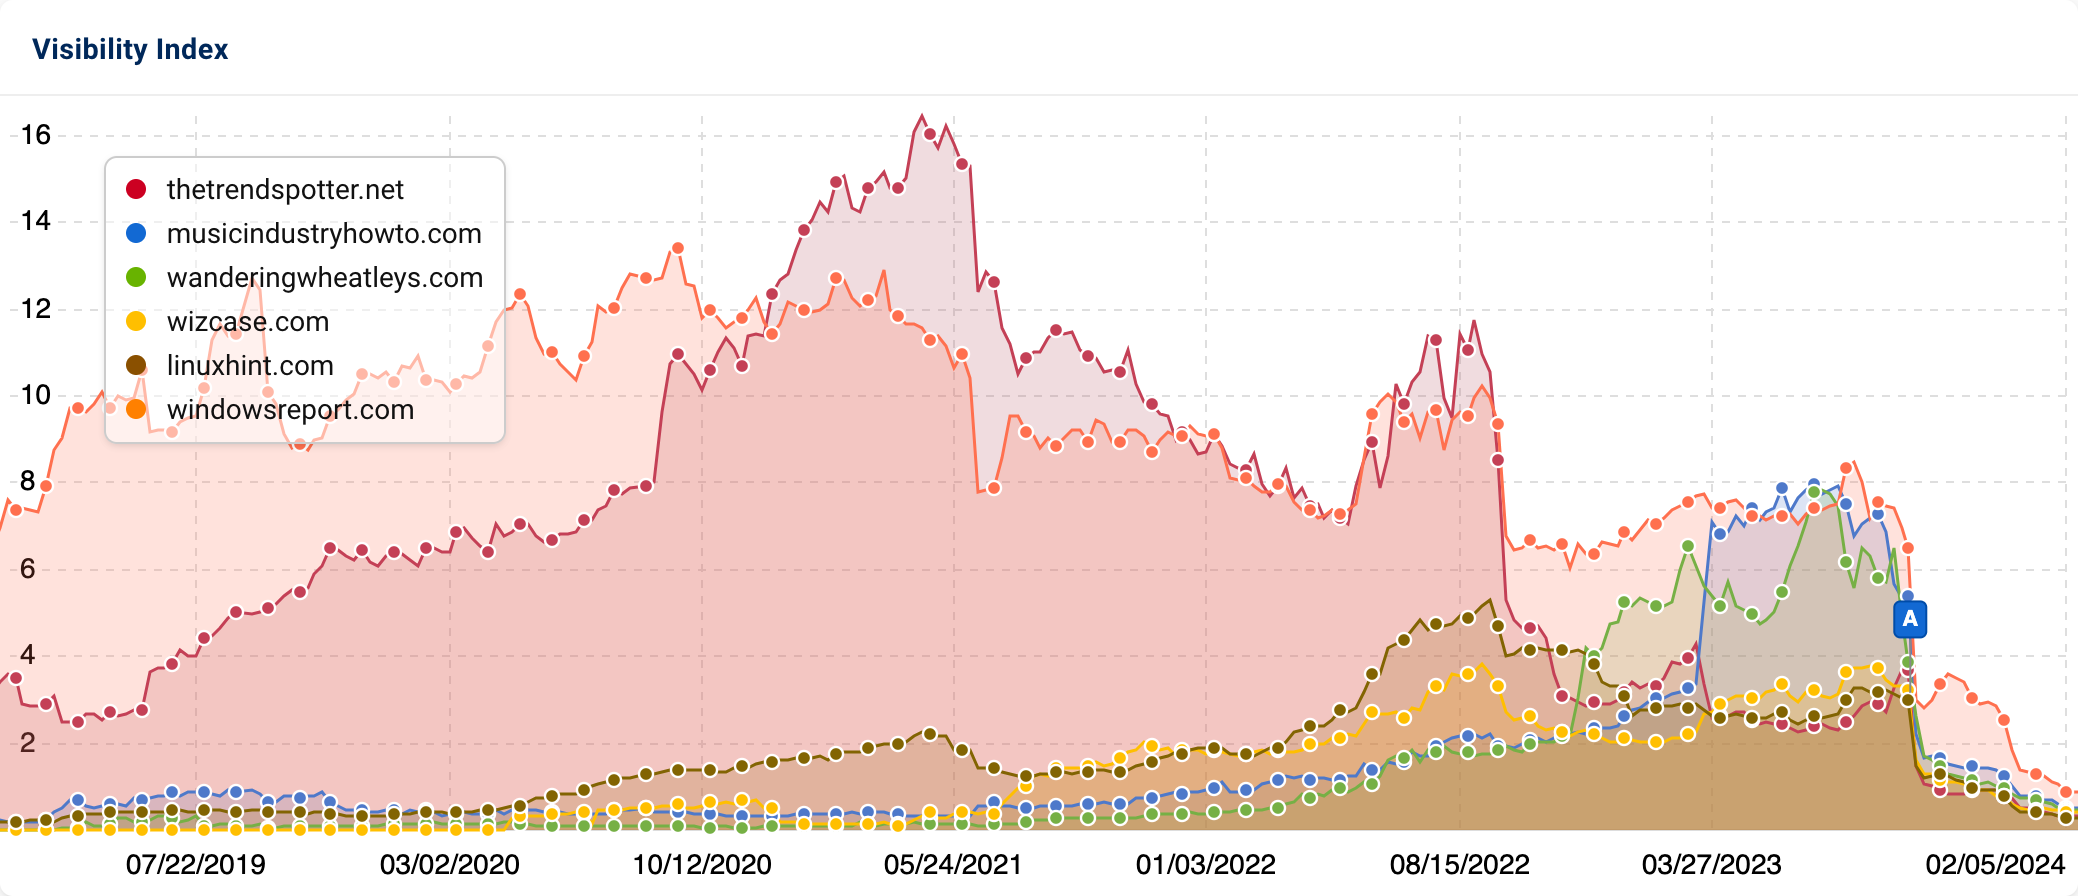 The comparison of the Visibility Index of the domains thetrendspotter.net, musicindustryhowto.com, wanderingwheatleys.com, wizcase.com, linuxhint.com and windowsreport.com.